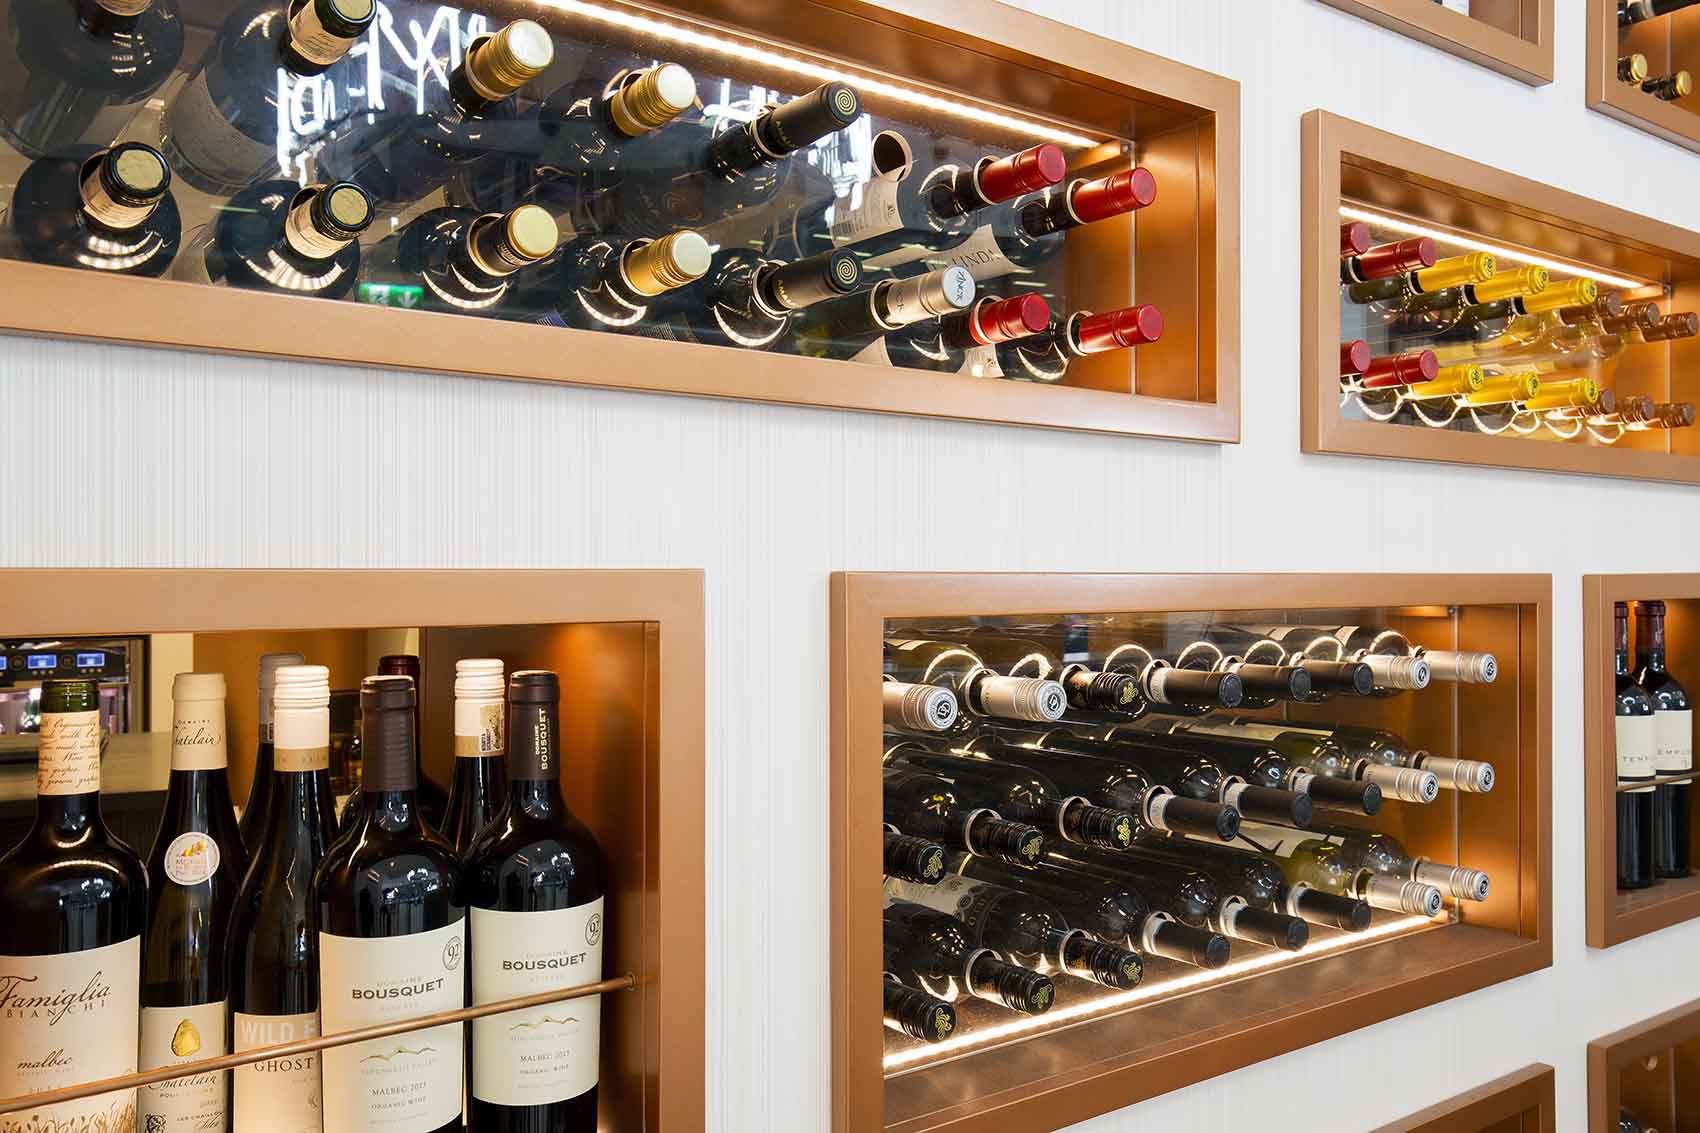 Wine display in unit with textured wall covering and copper boxes